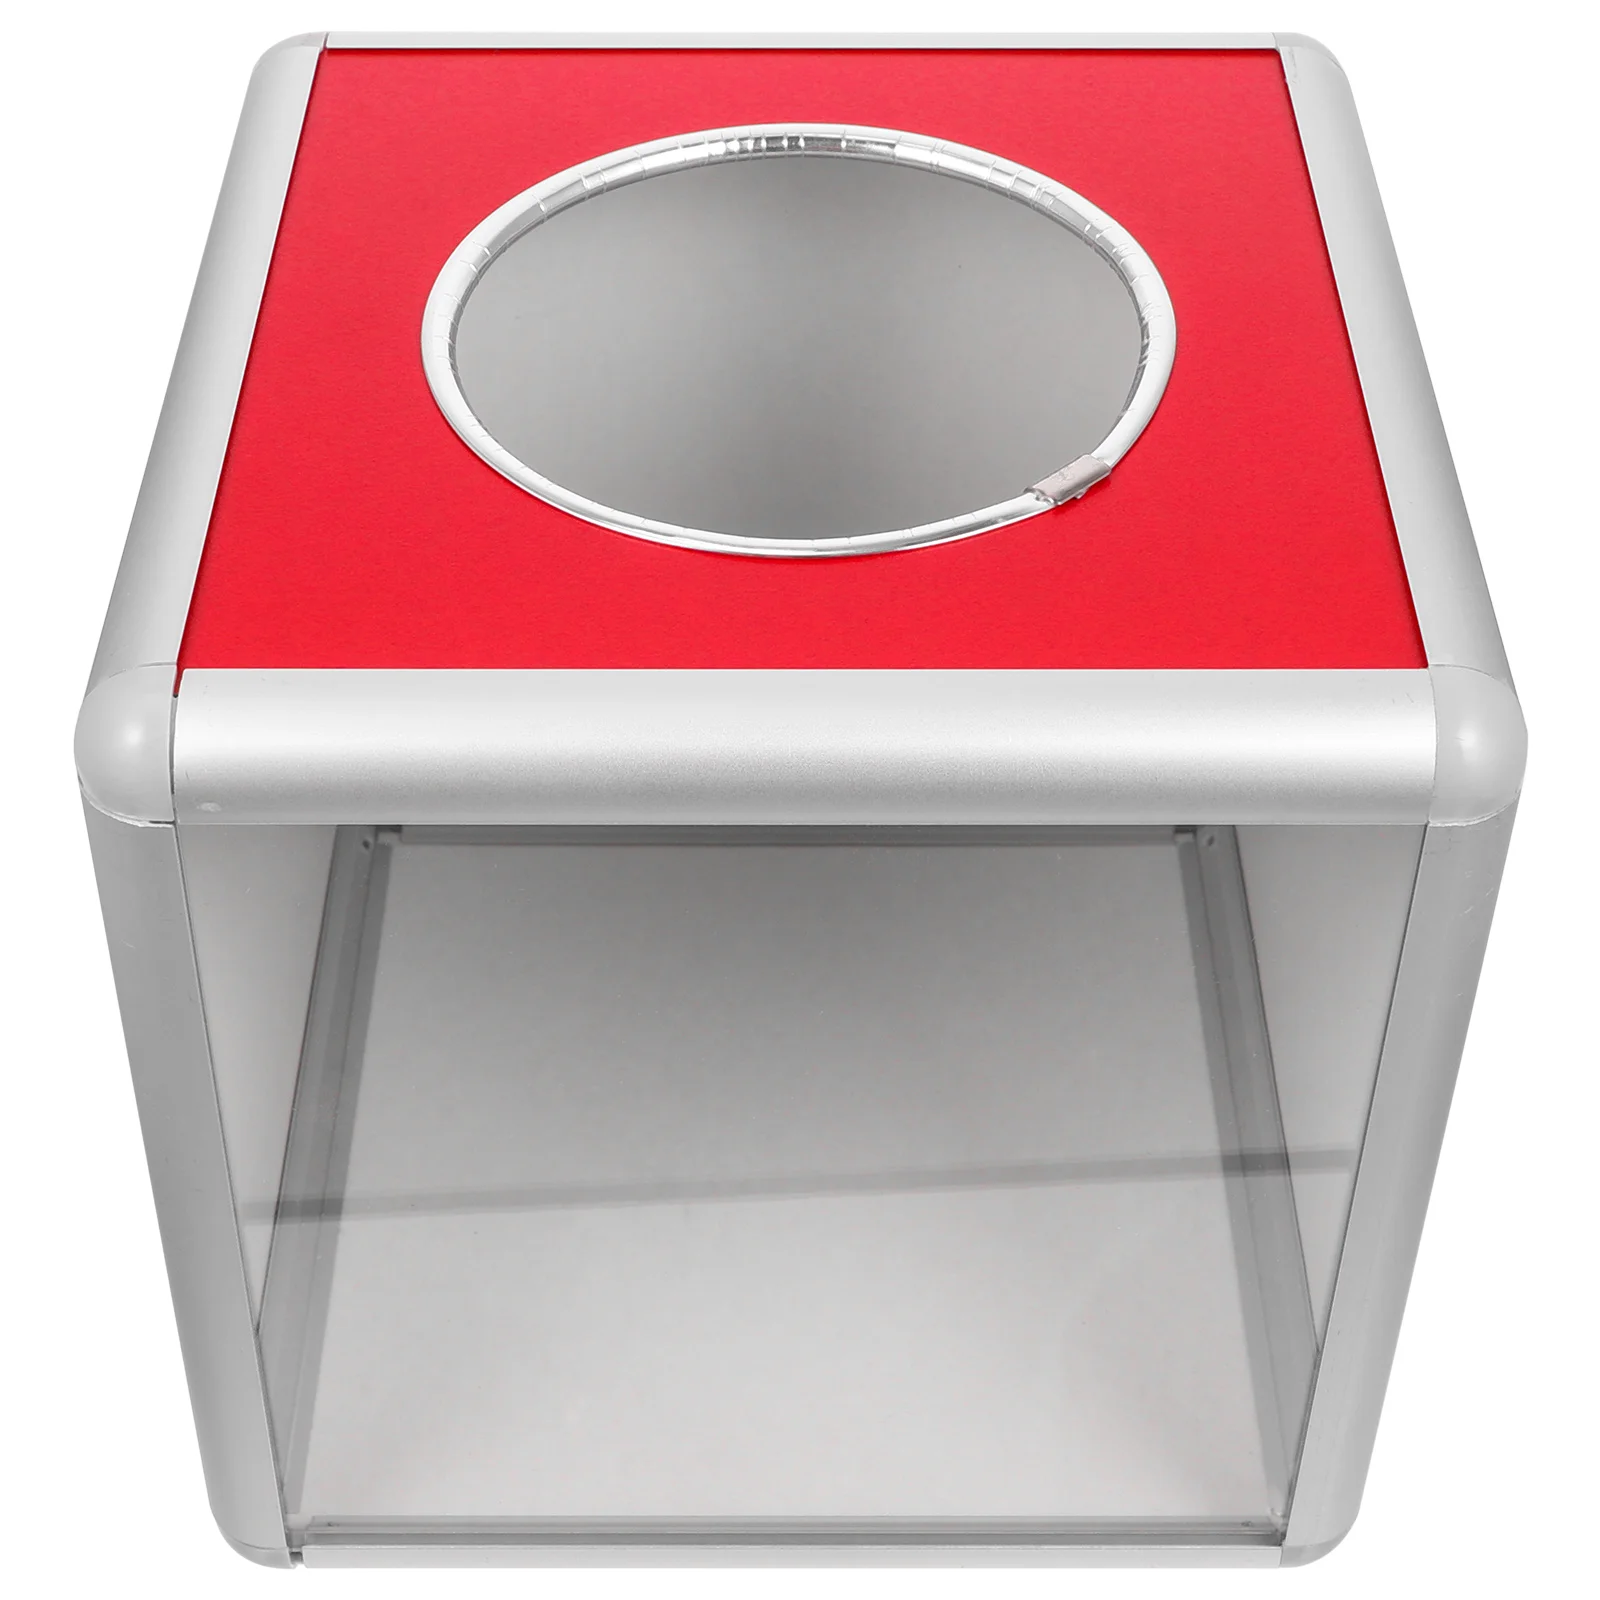 

Clear Suggestion Box Ticket Raffle Box Office Storage Box Acrylic Donation Ballot Box Clear Lottery Box Drawing Box for Tickets